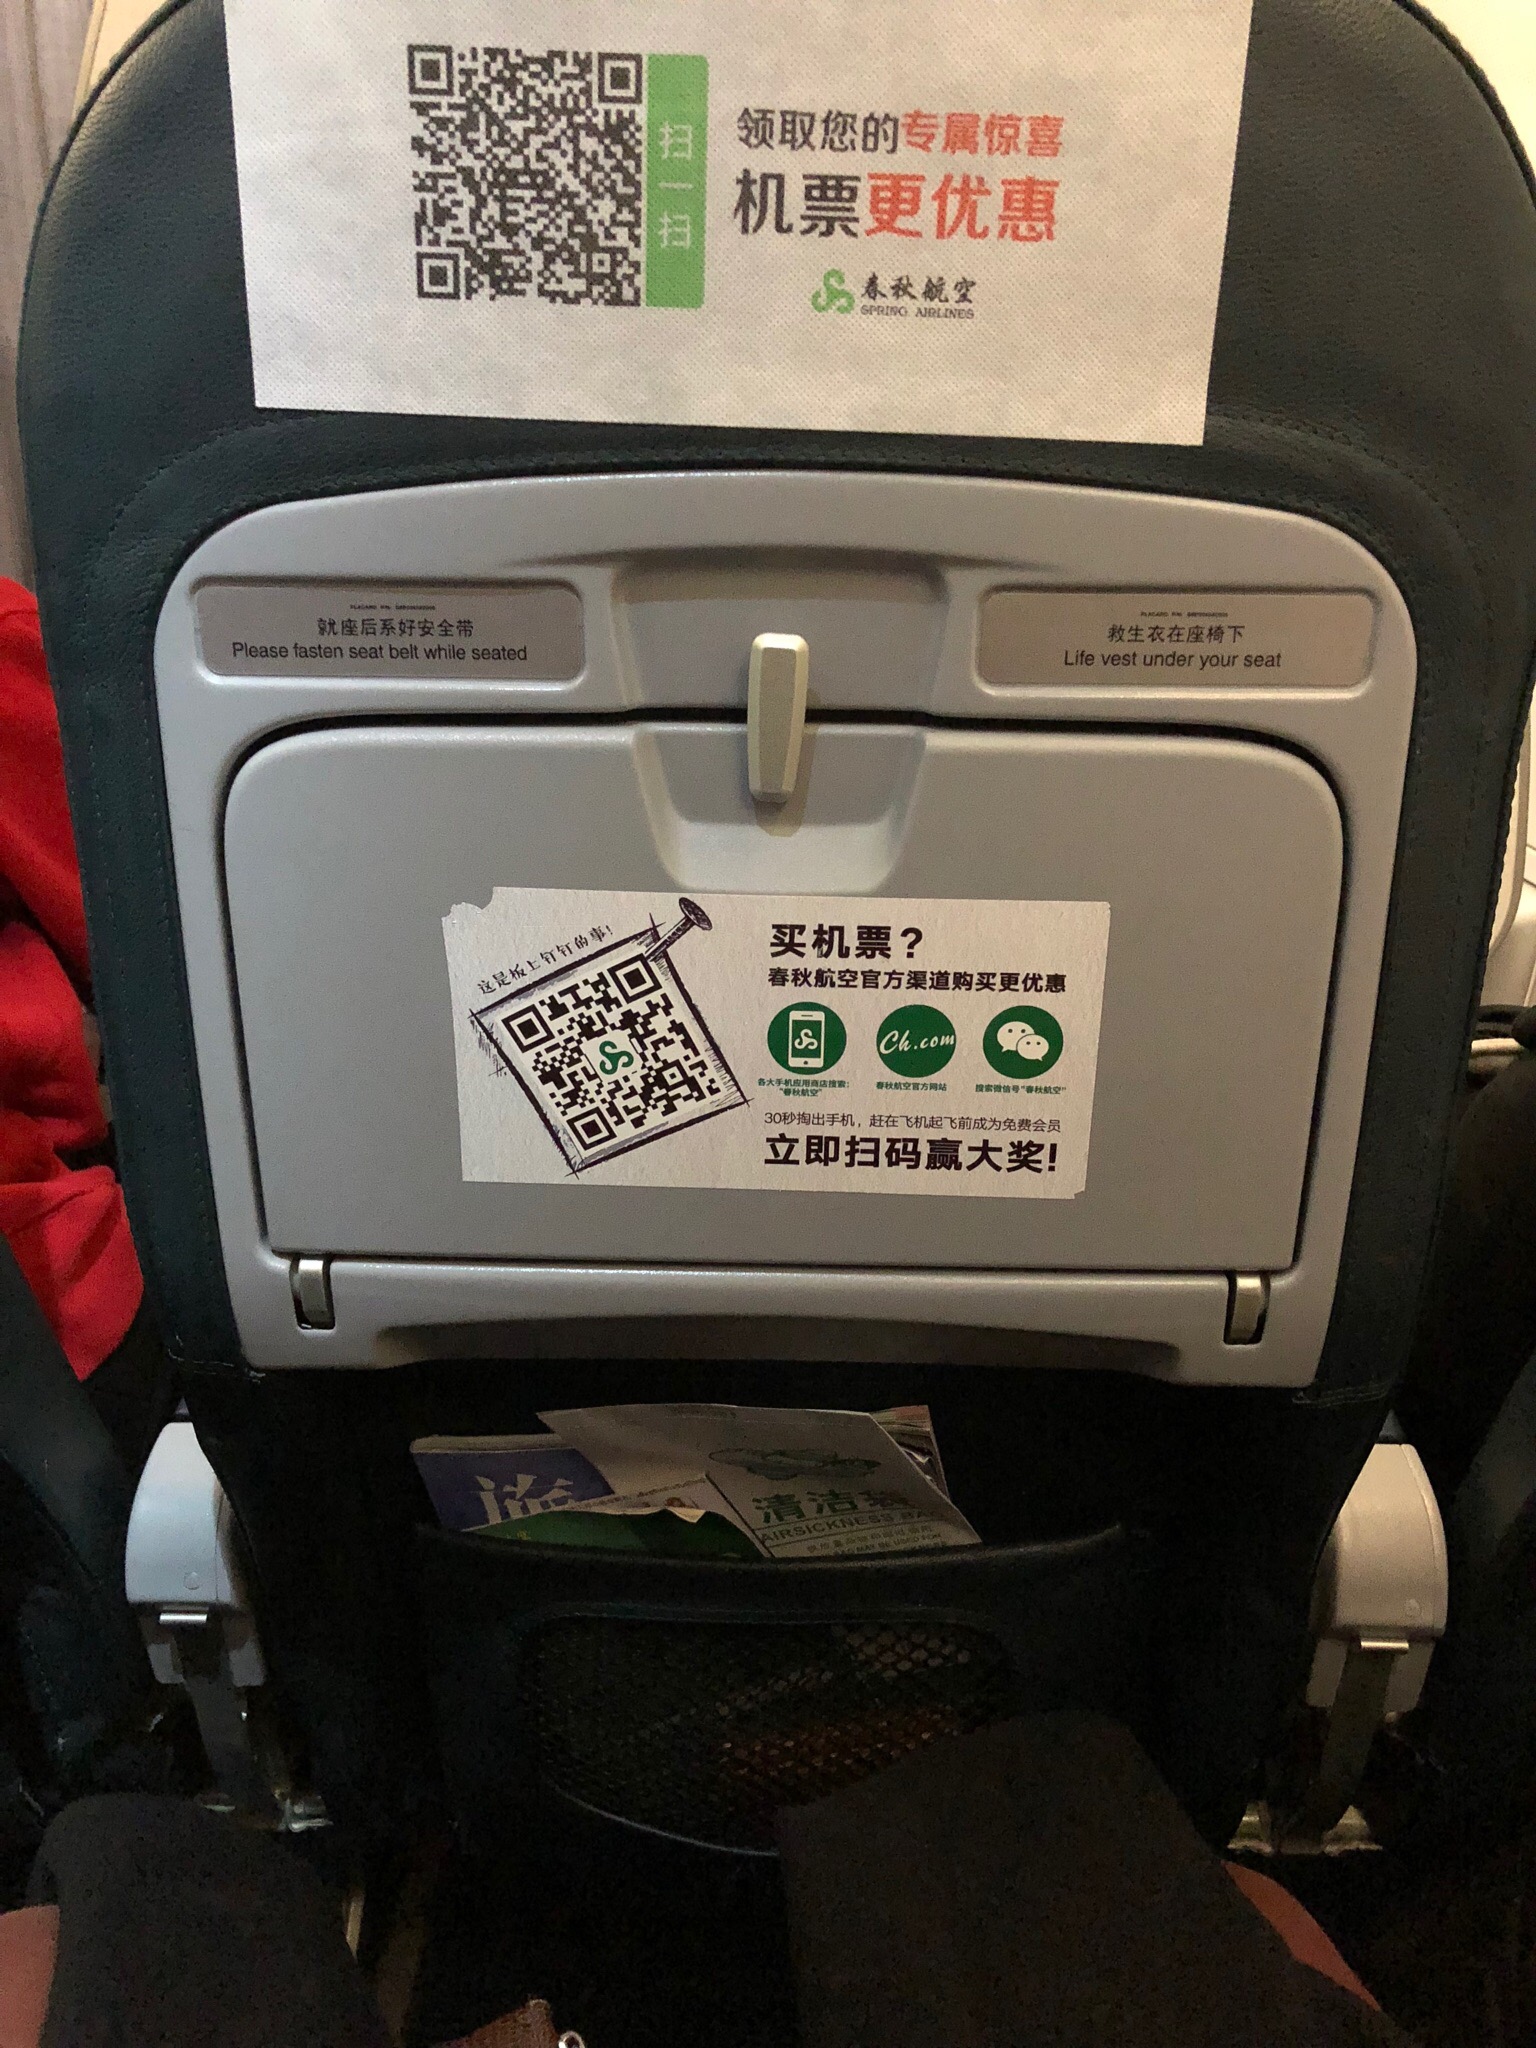 a seat with a qr code on it